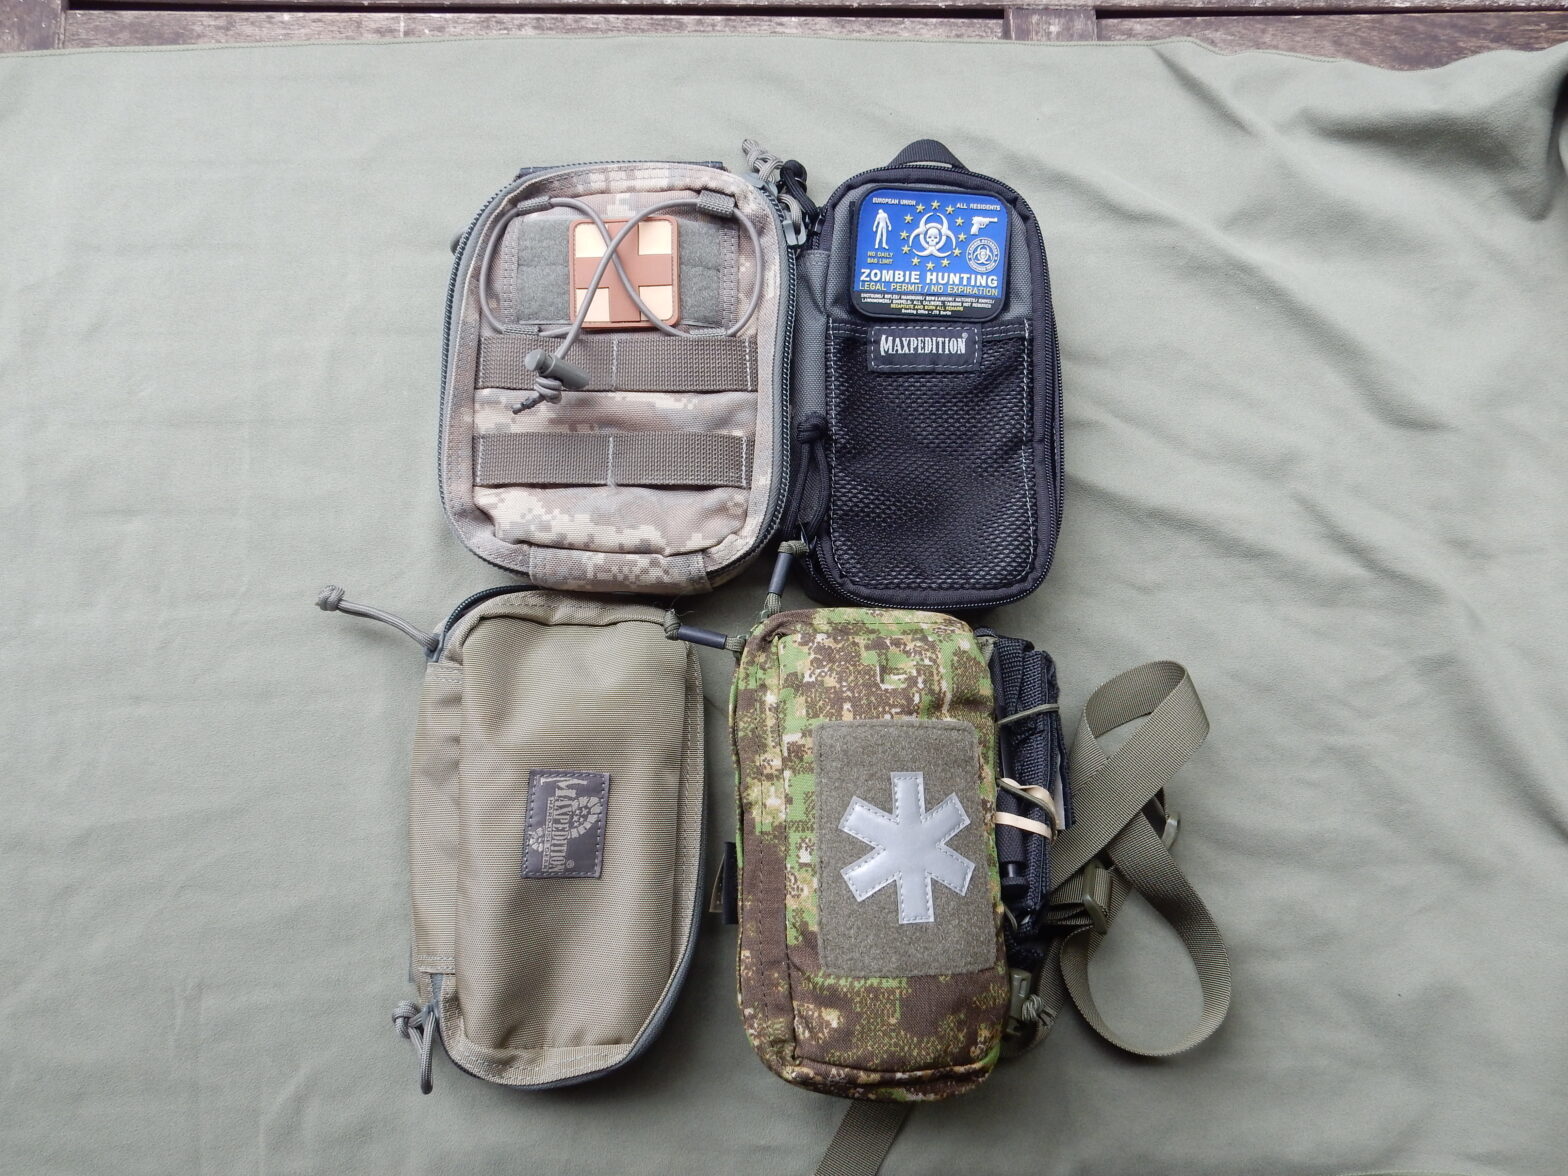 “Which pouch should I carry my insulin in?”